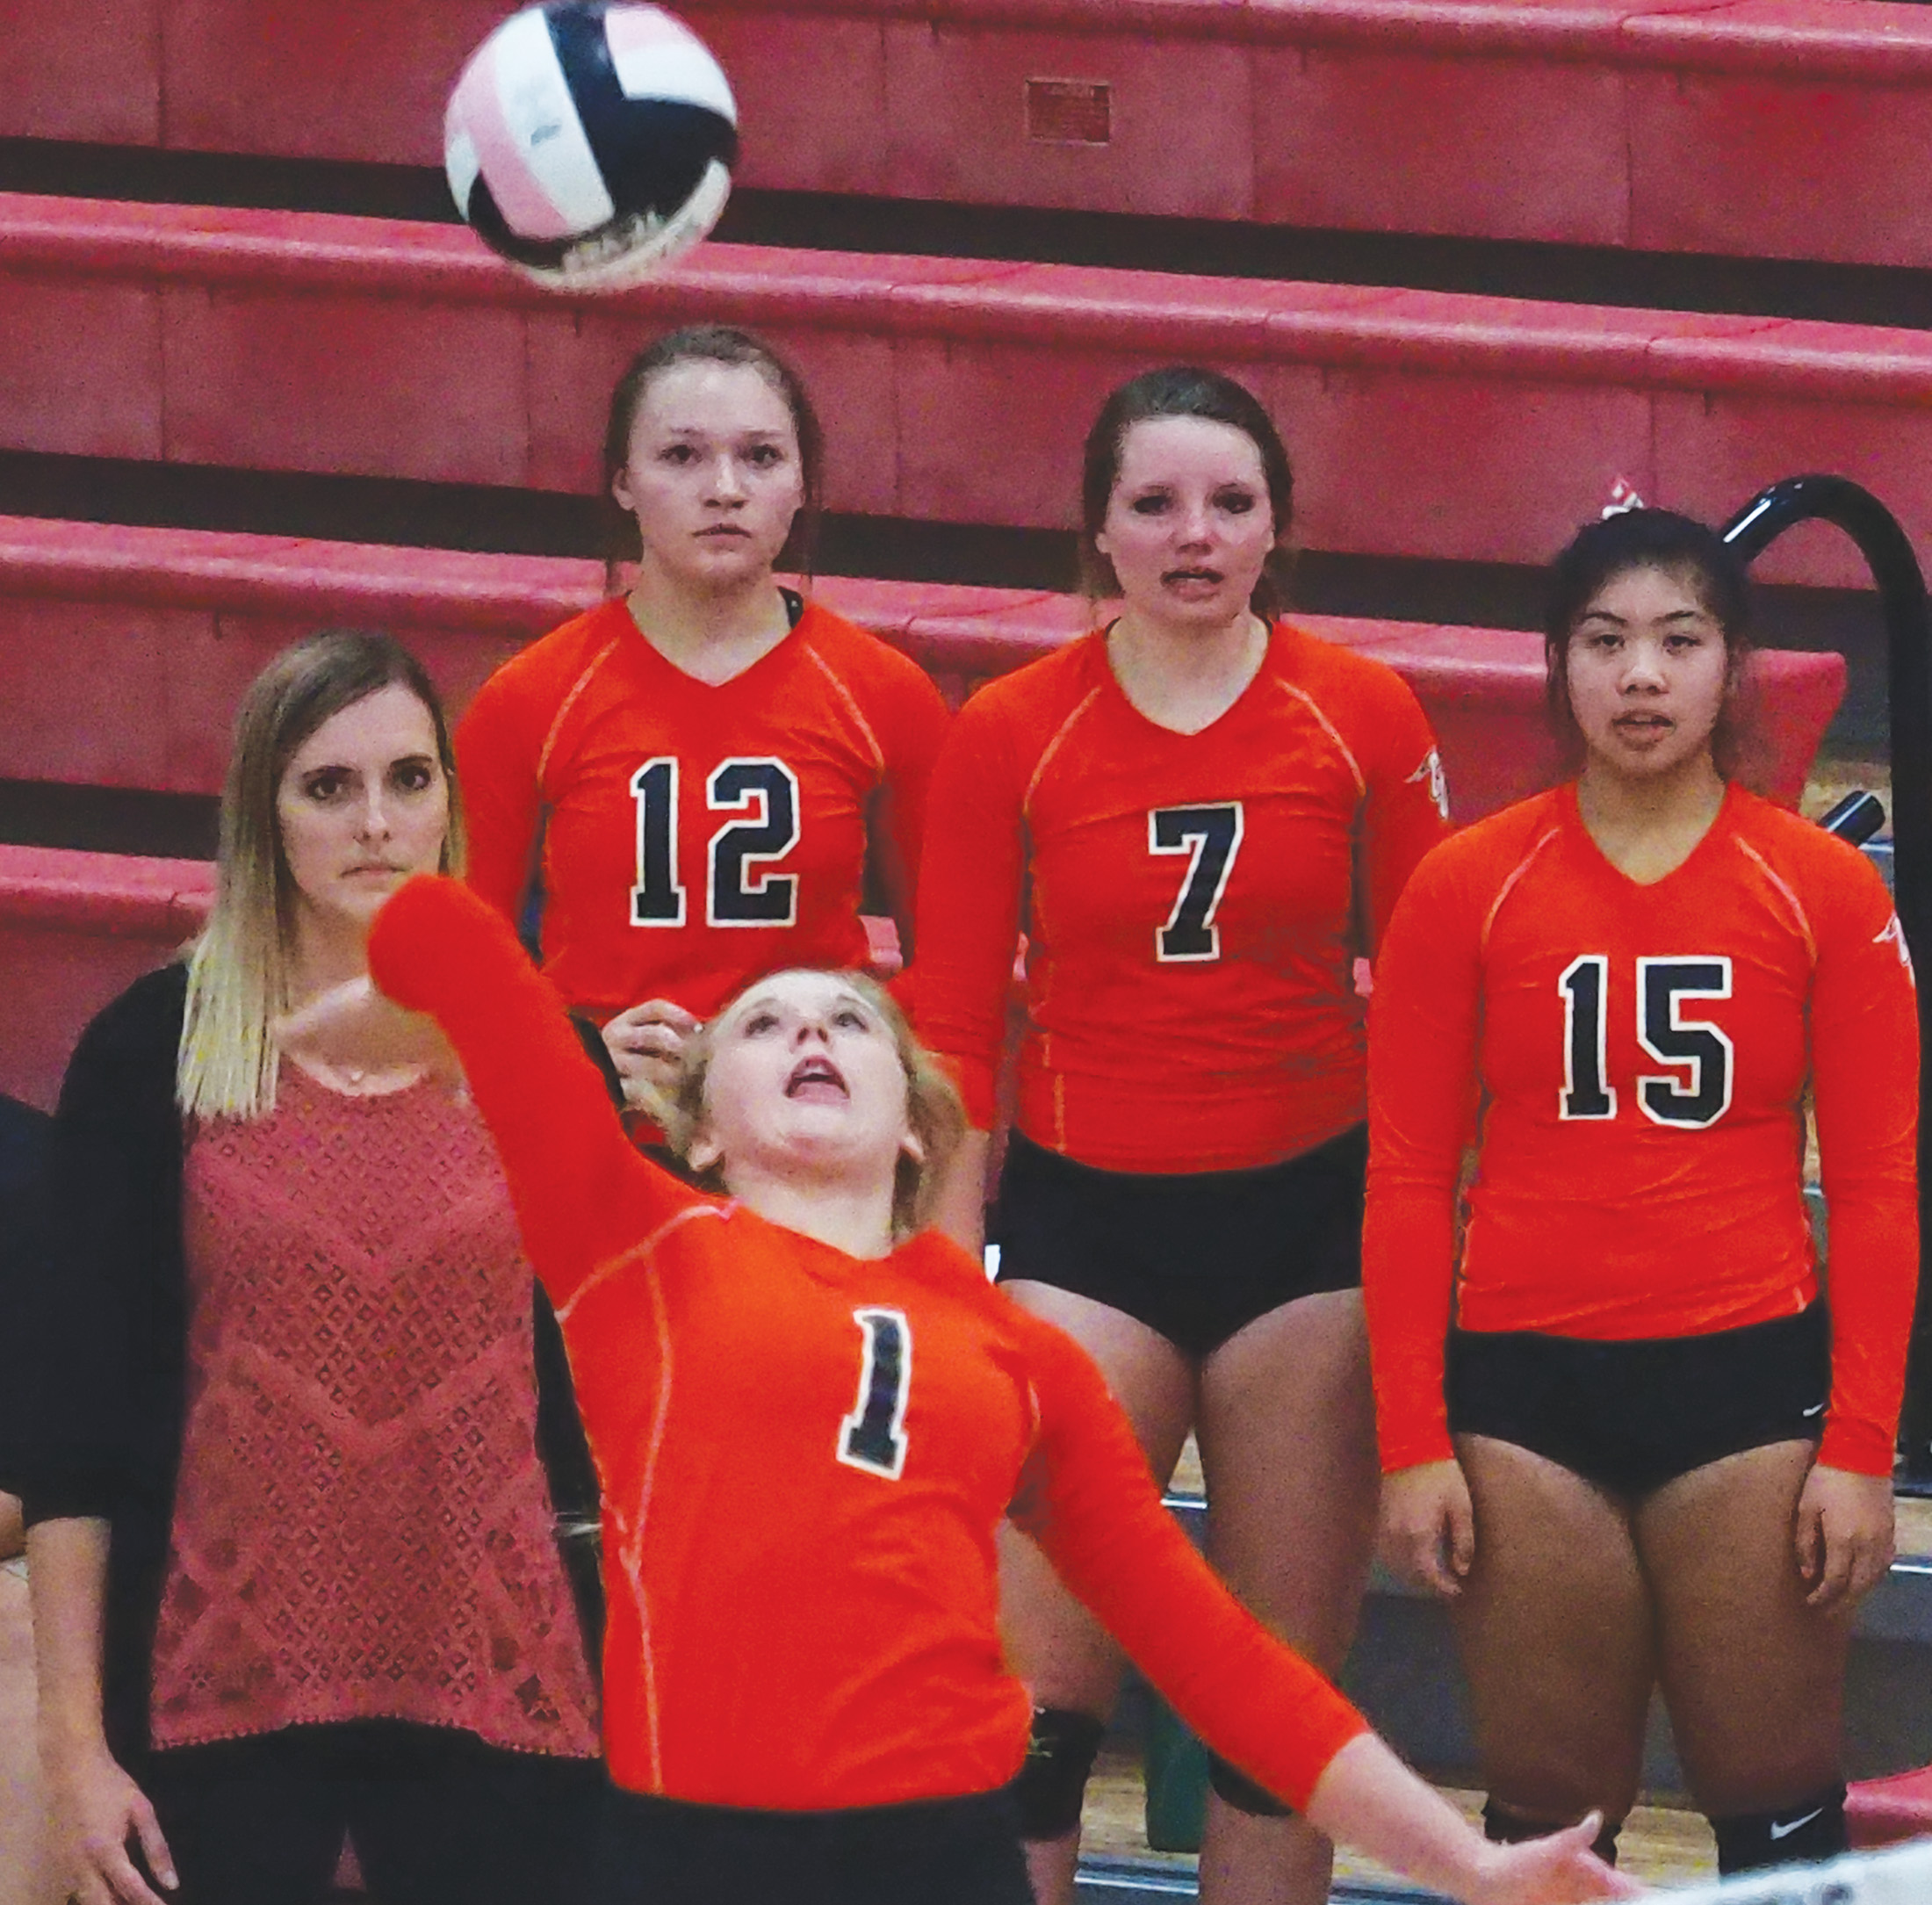 Comets fight for every point at VB triangular